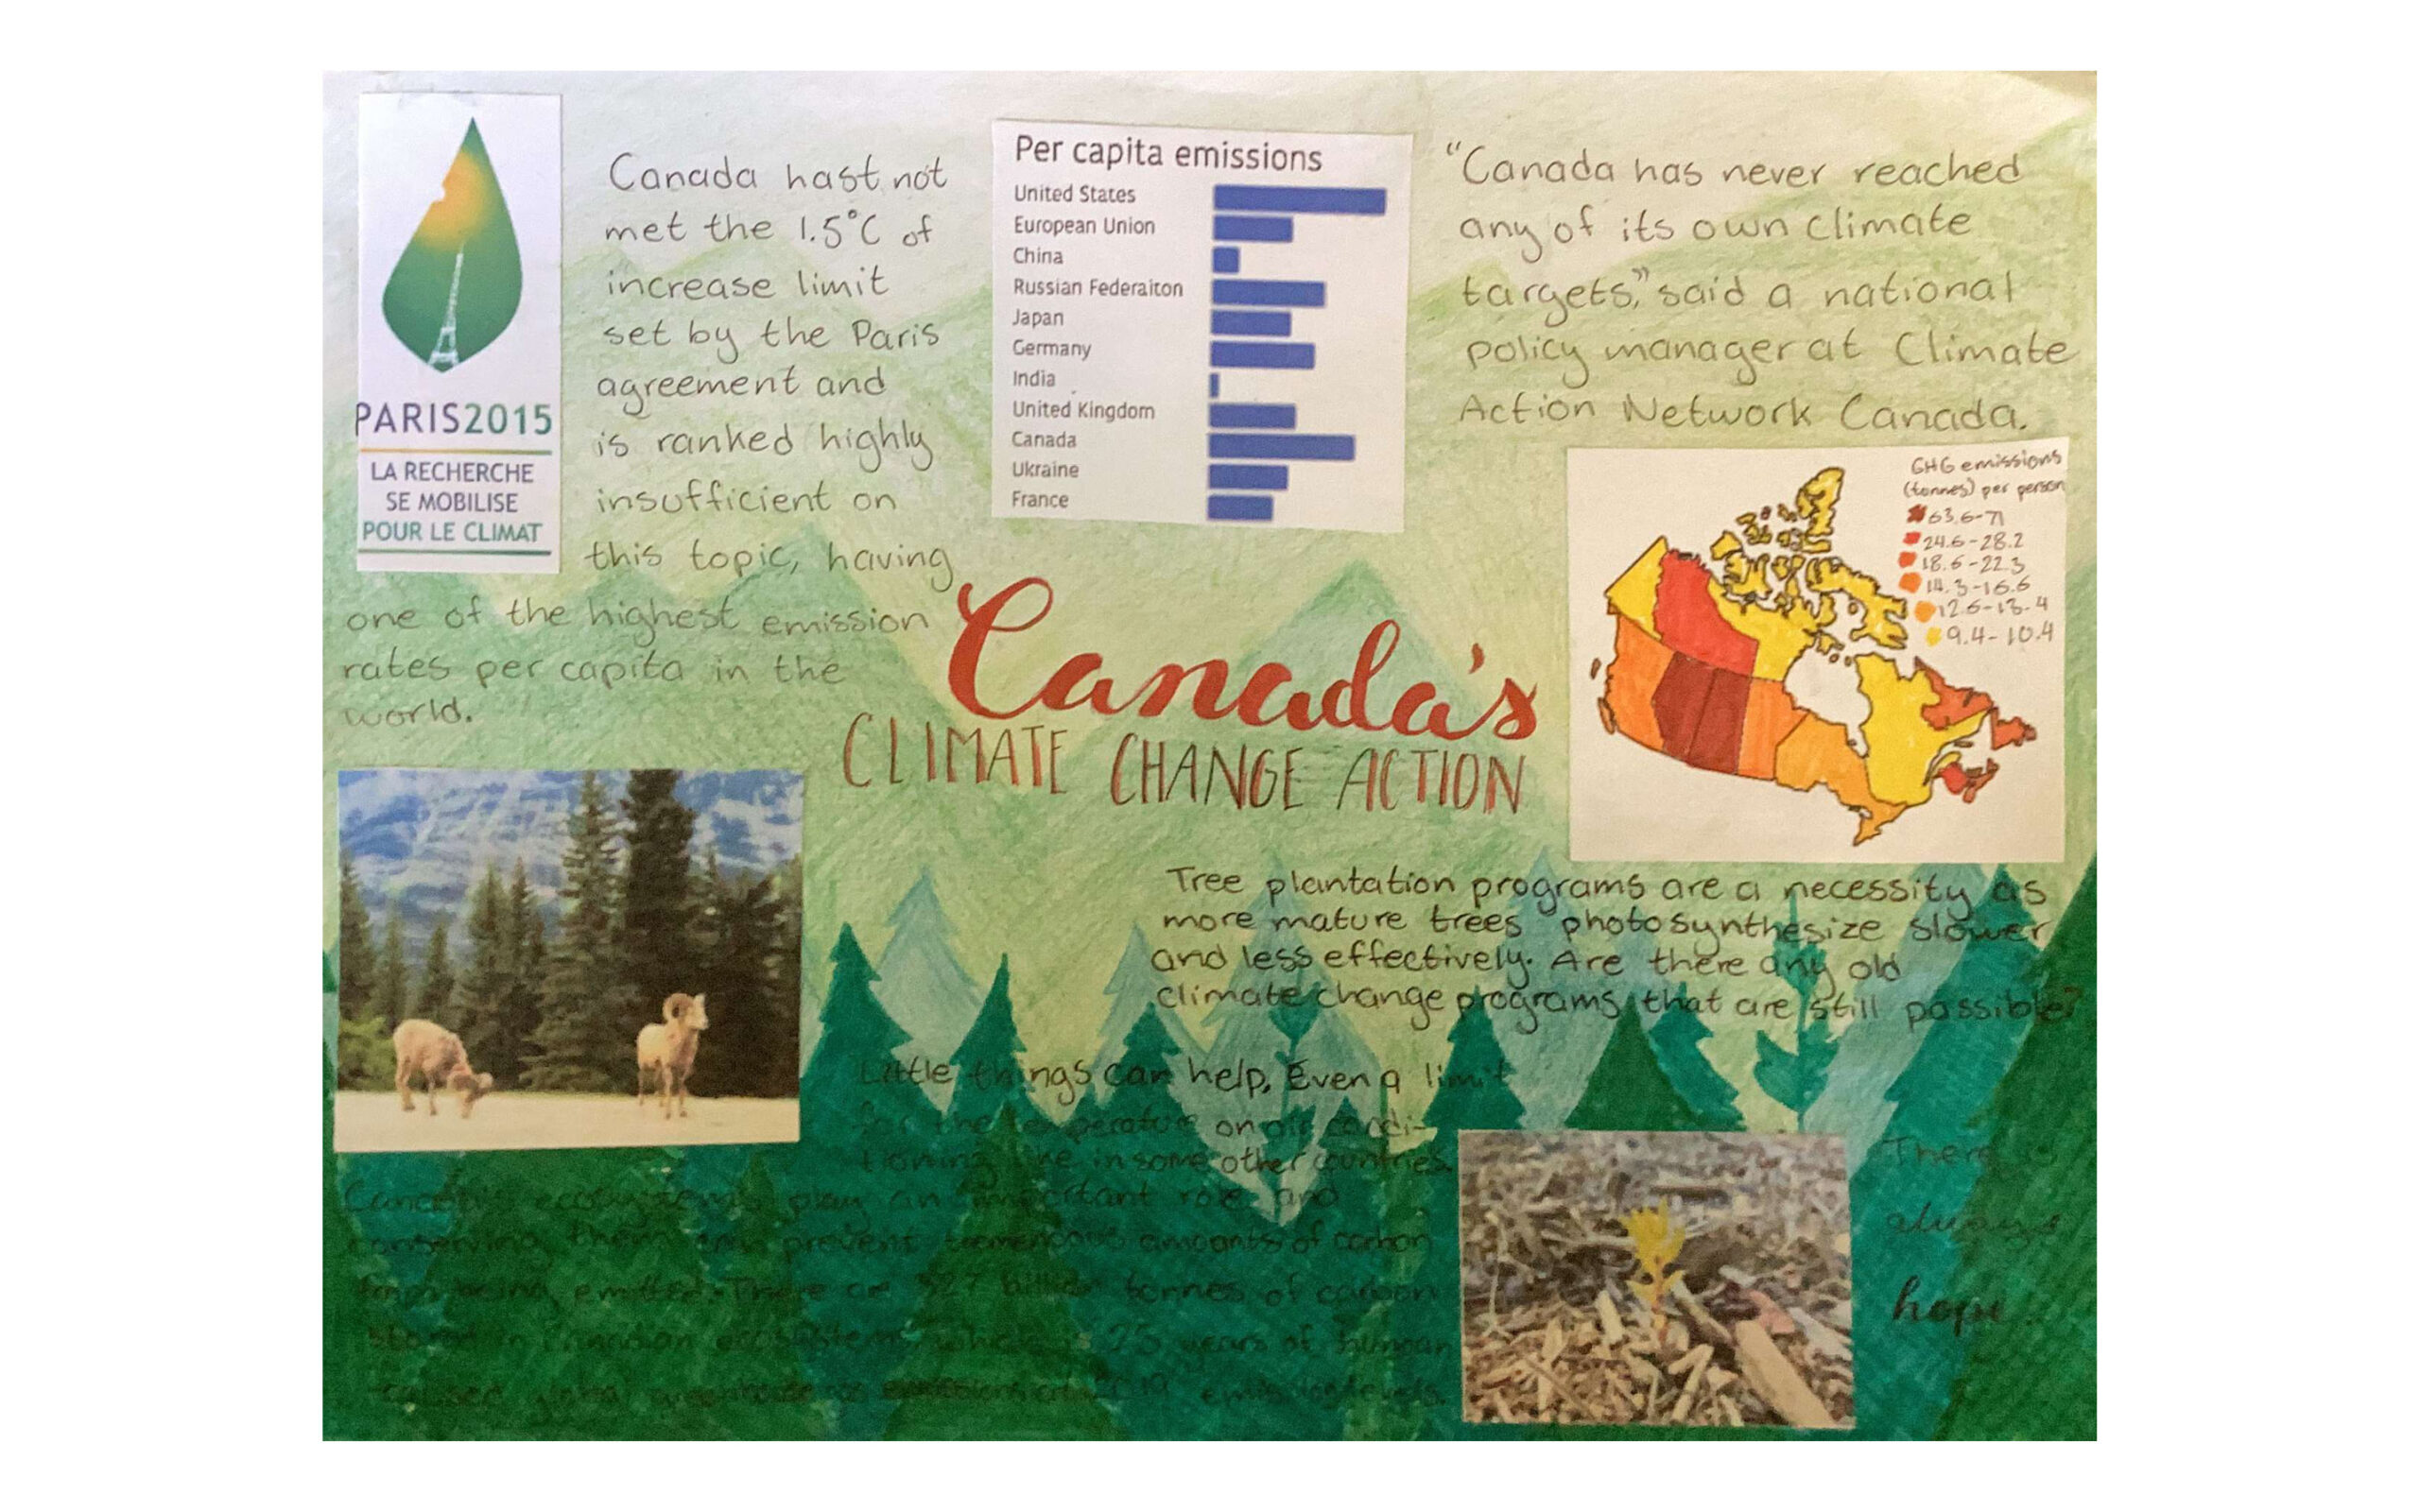 Hand-drawn artwork featuring text, graphs, and images related to Canada’s climate change action. The background is made up of silhouettes of mountains and trees in a gradient of green shades. One graph details emissions per in various countries, another graph shows greenhouse gas emissions per Canadian Province. There is a photo of a flower, and another of a mountain goat glued into the artwork.